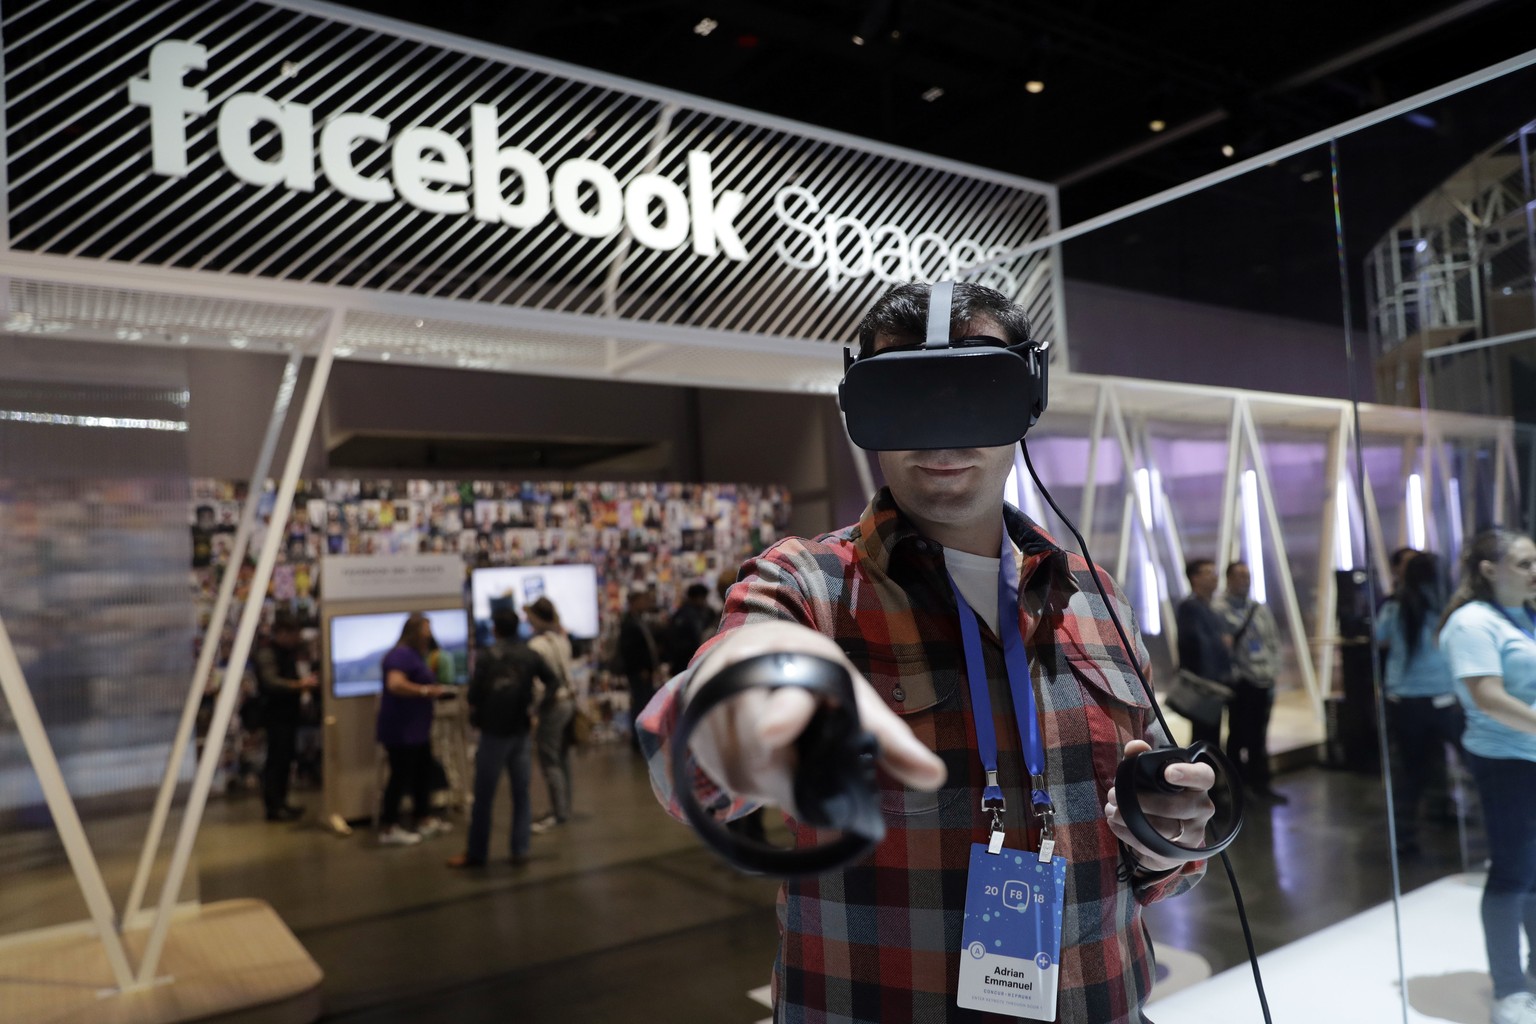 FILE - In this Tuesday, May 1, 2018, file photo, an attendee tries on the new Oculus Go goggles during F8, Facebook's developer conference in San Jose, Calif. Germany's Federal Cartel Office, or Bunde ...